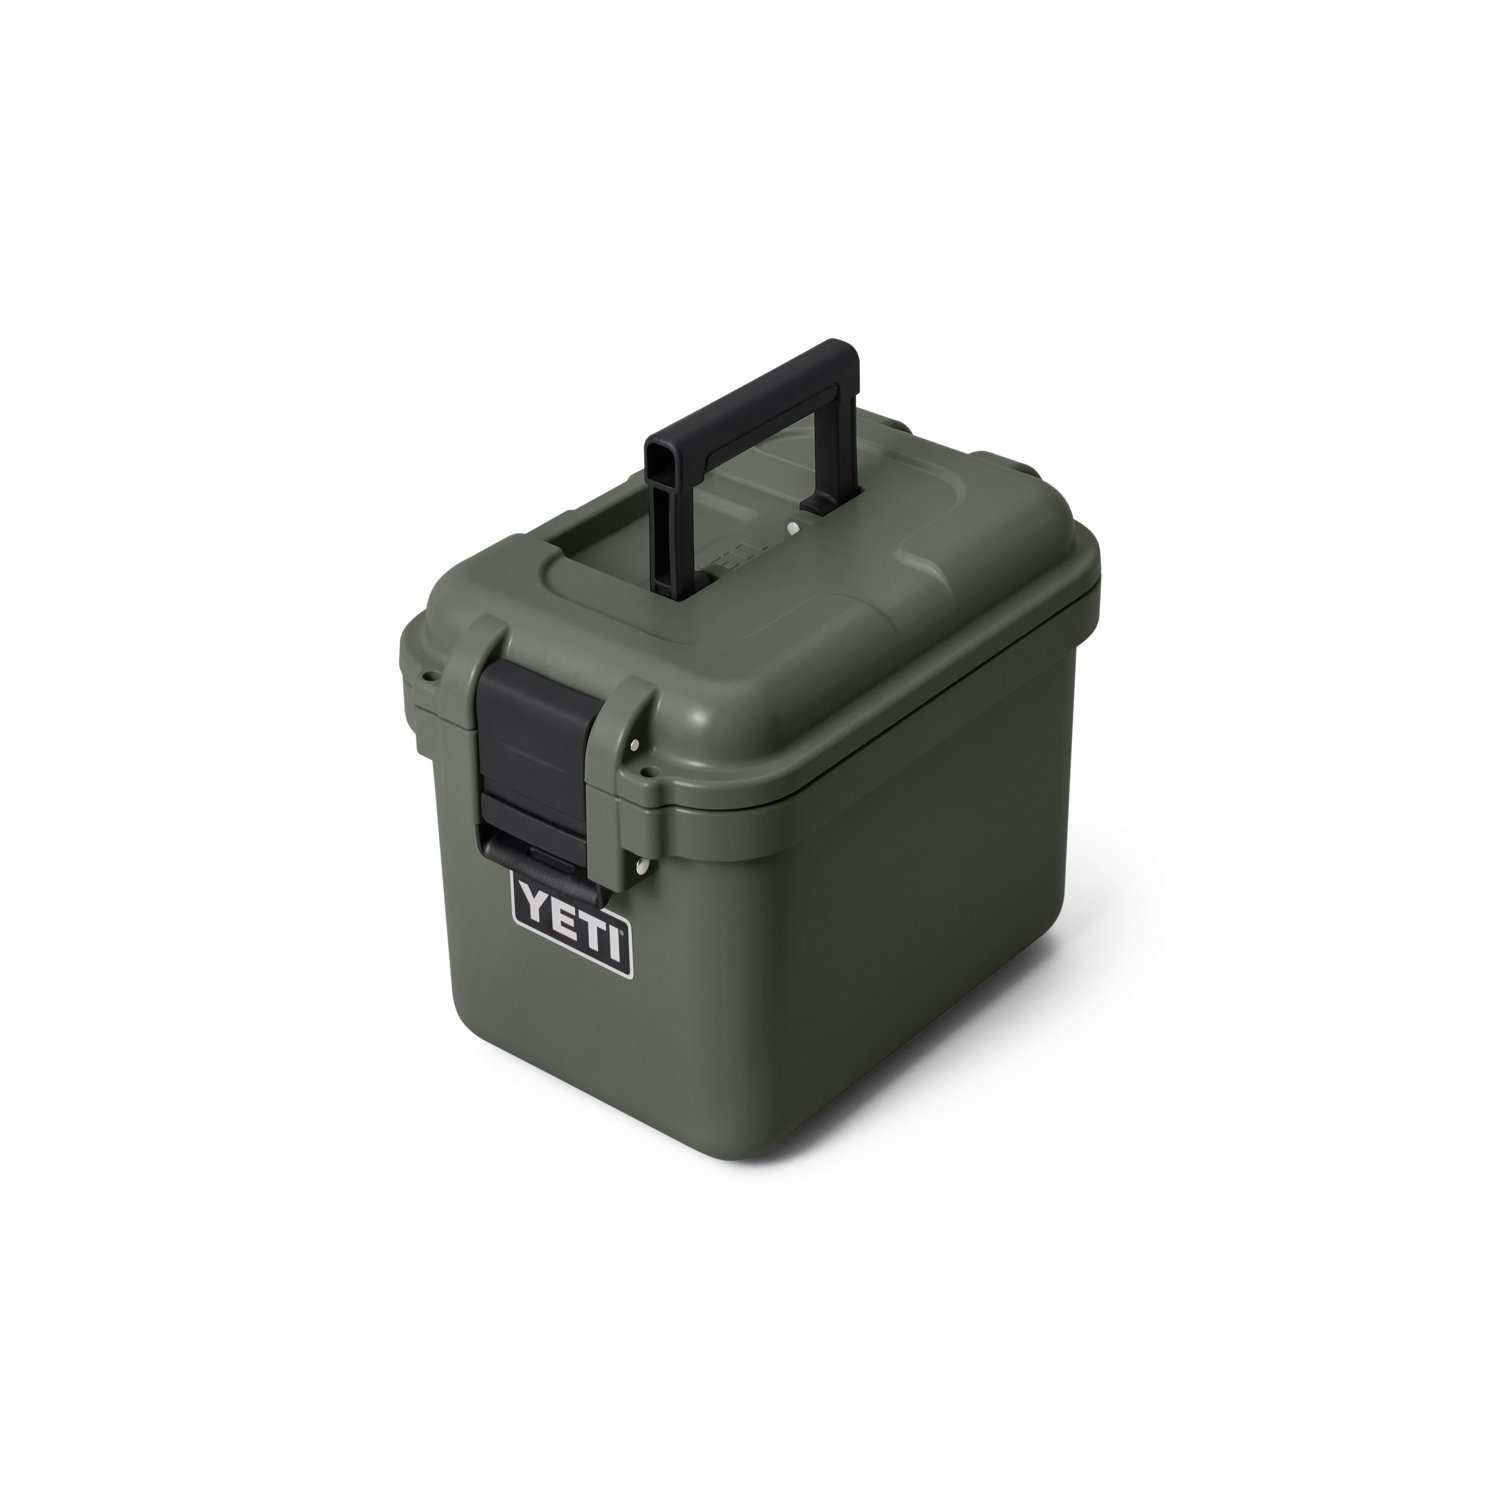 VIDEO: The New Yeti Loadout® GoBox 15 Reviewed - FLYCRAFT USA